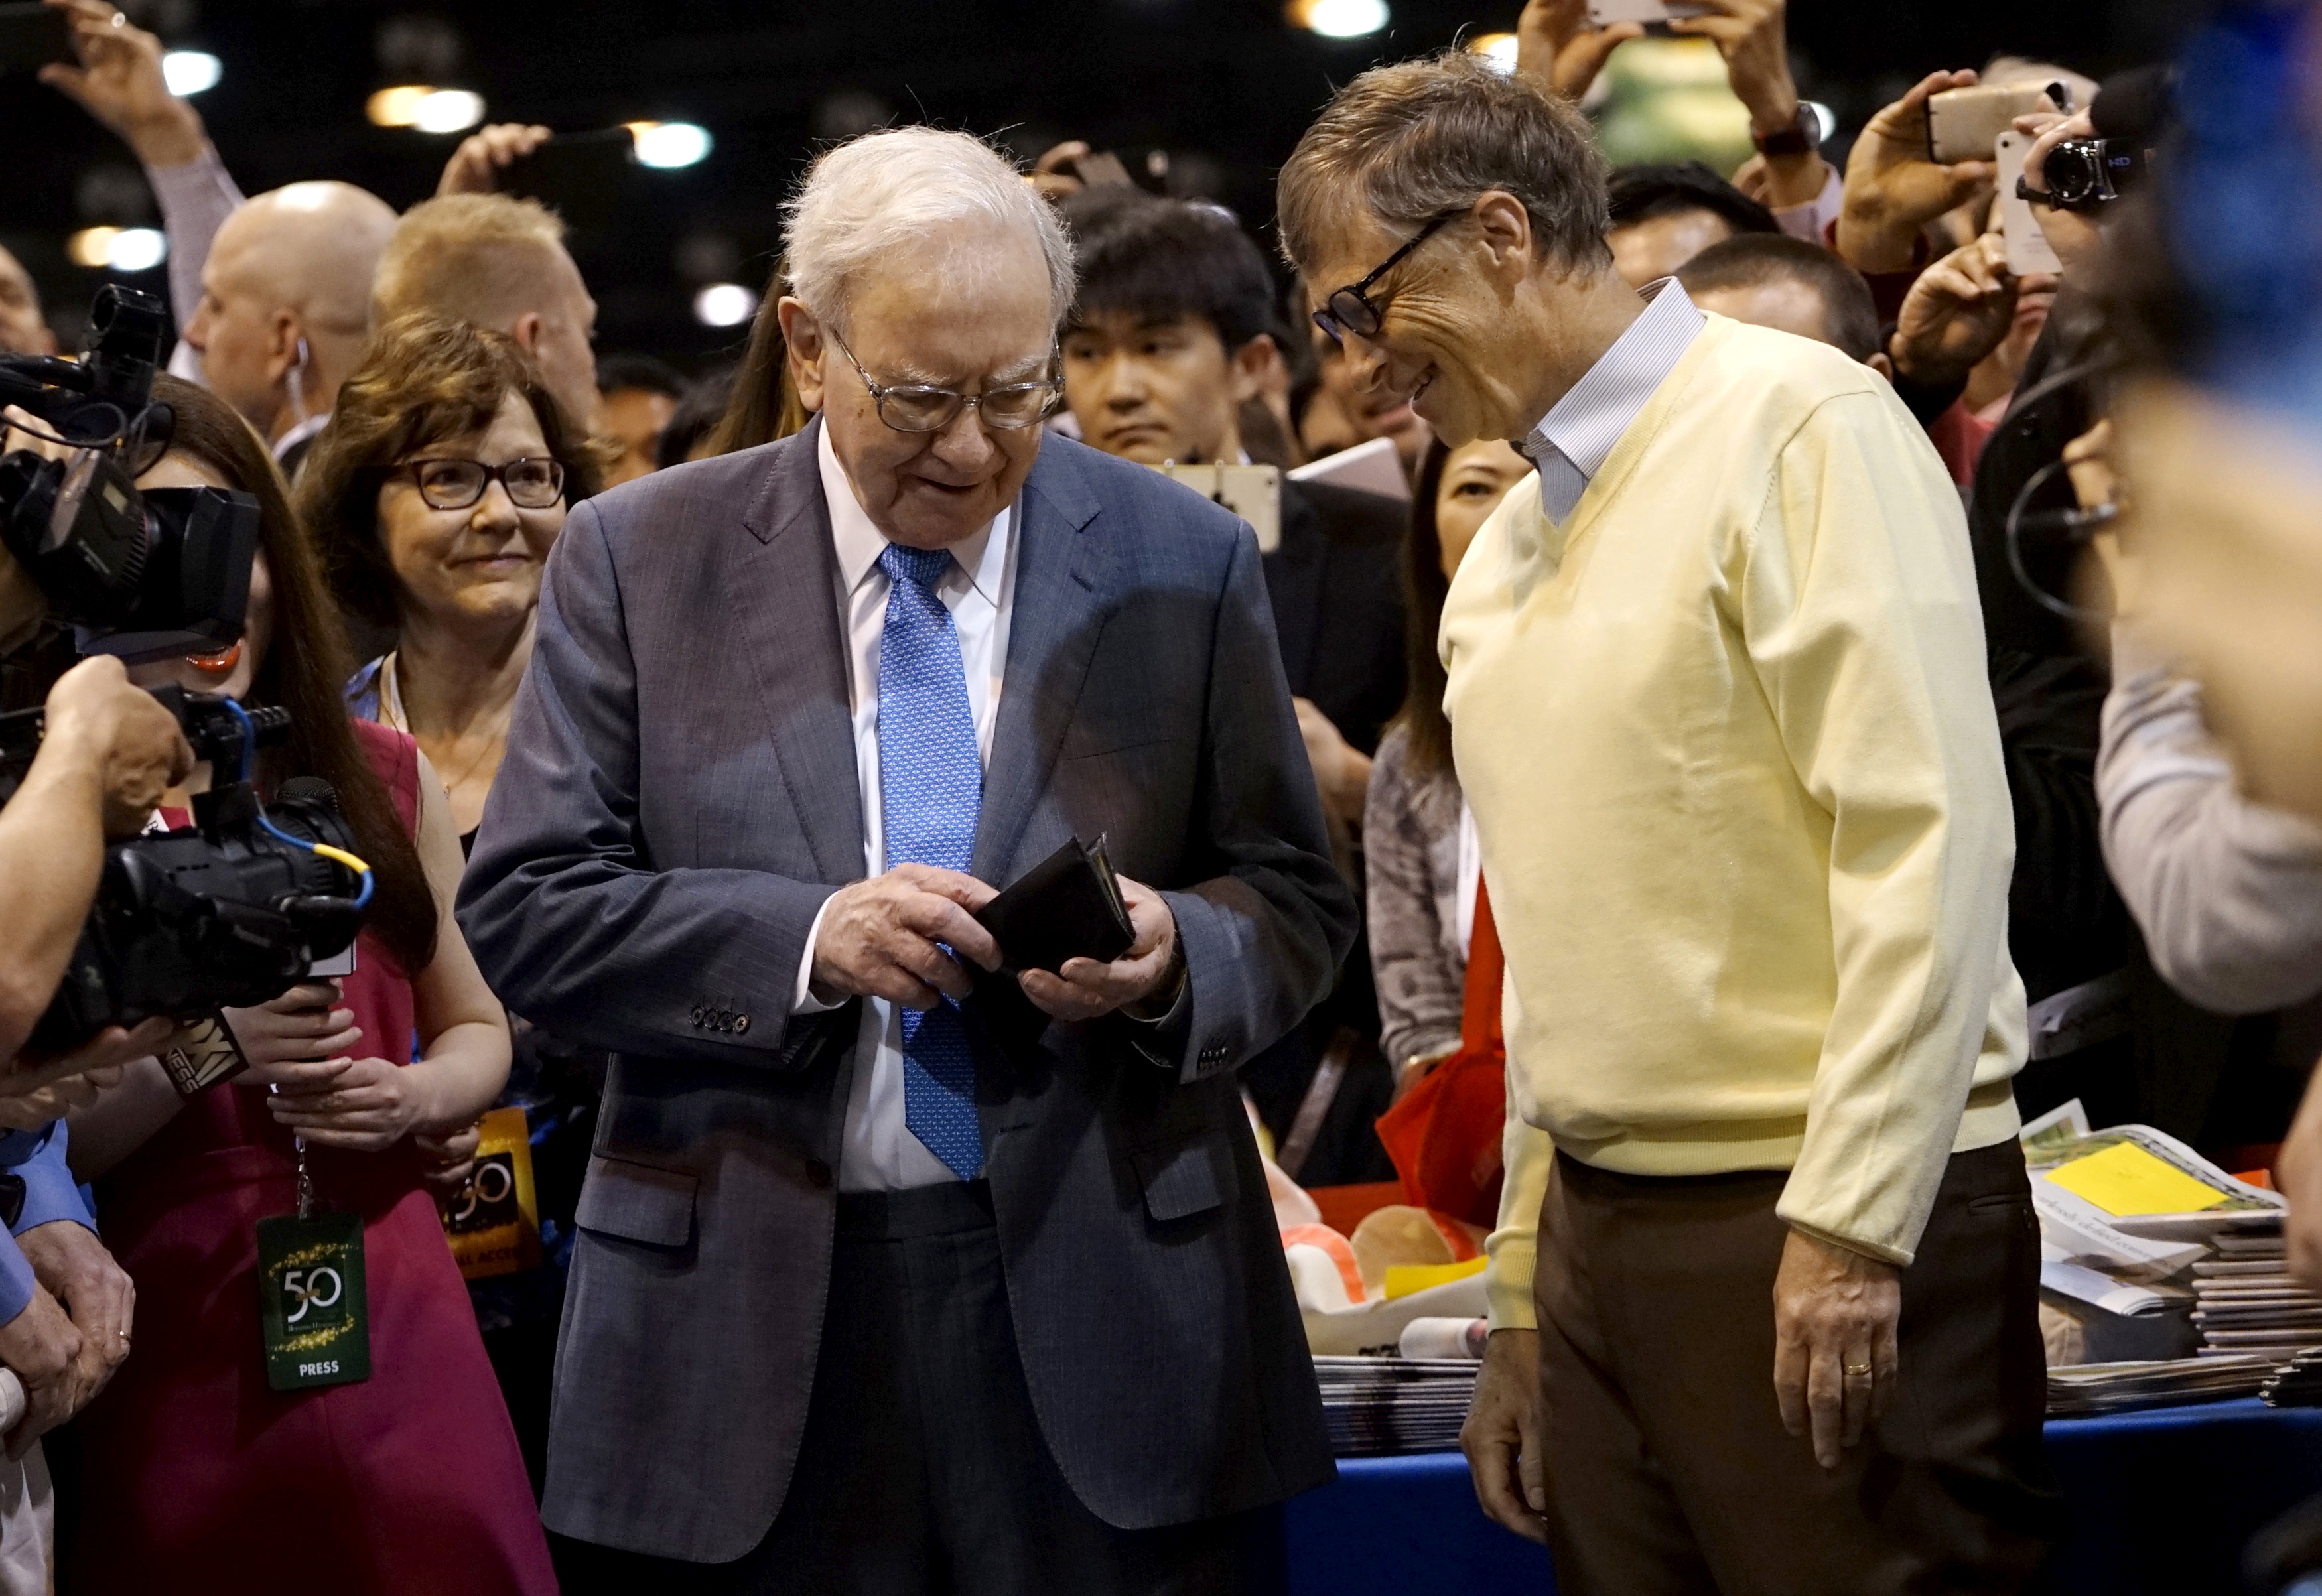 Berkshire Hathaway CEO Warren Buffett gets his wallet out to pay a bet to Microsoft co-founder Bill Gates after participating in a newspaper throwing contest prior to the Berkshire annual meeting in Omaha